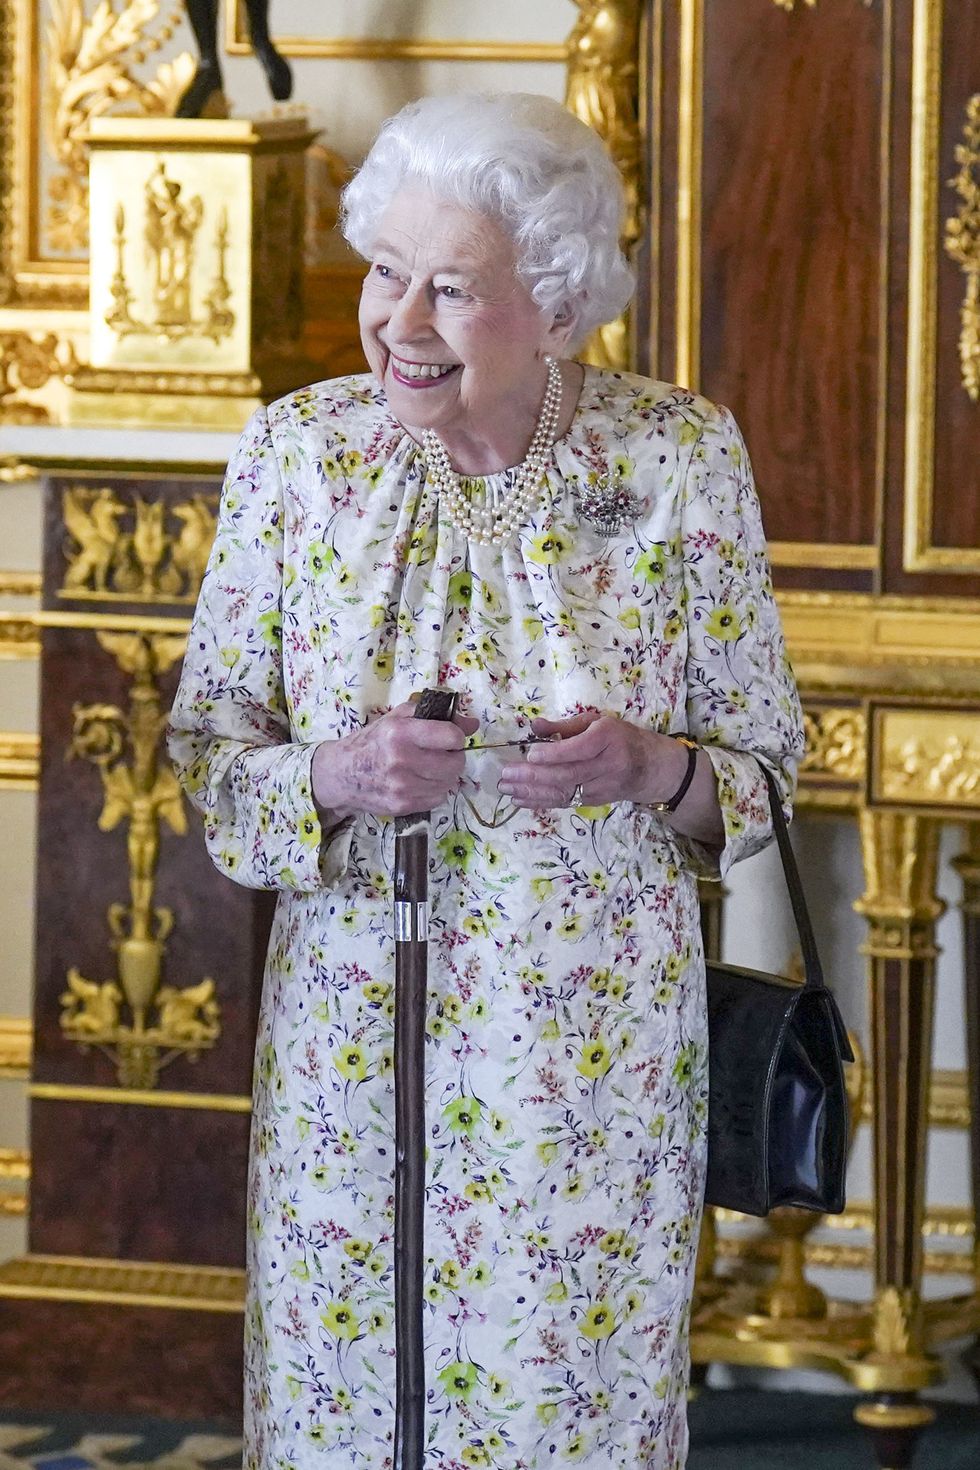 The Queen's fashion through the ages